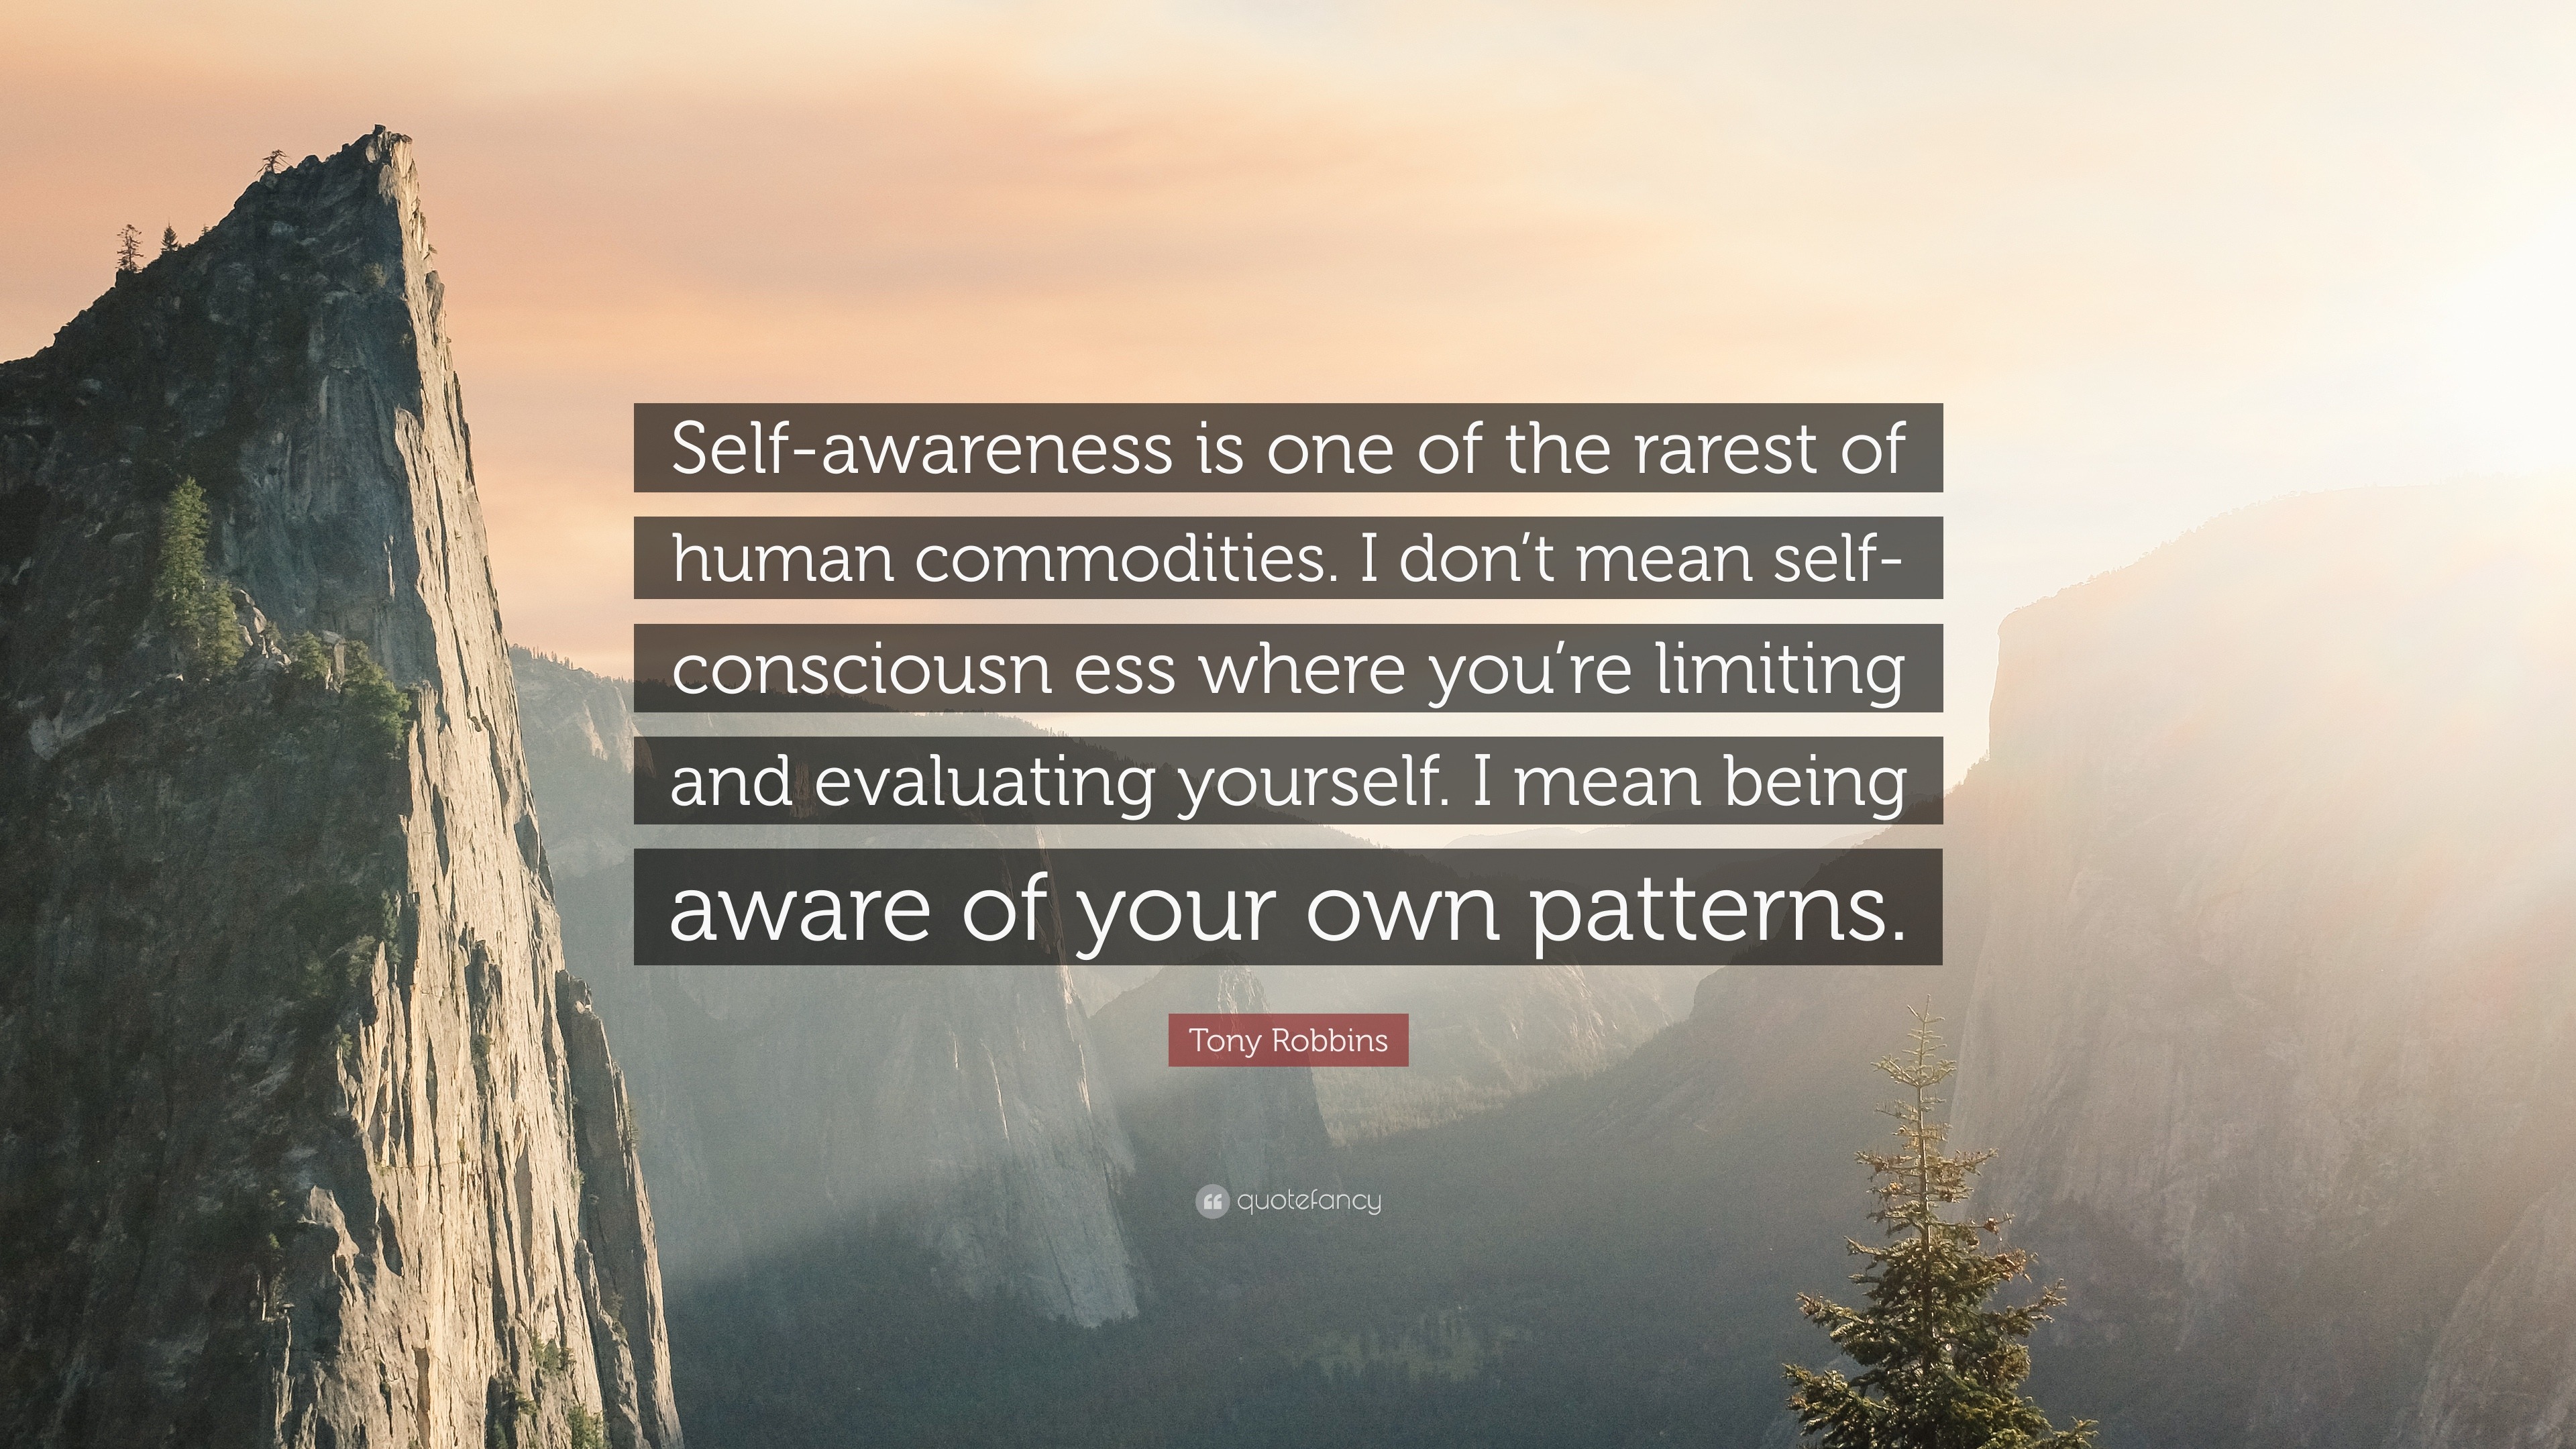 Tony Robbins Quote: “Self-awareness is one of the rarest of human